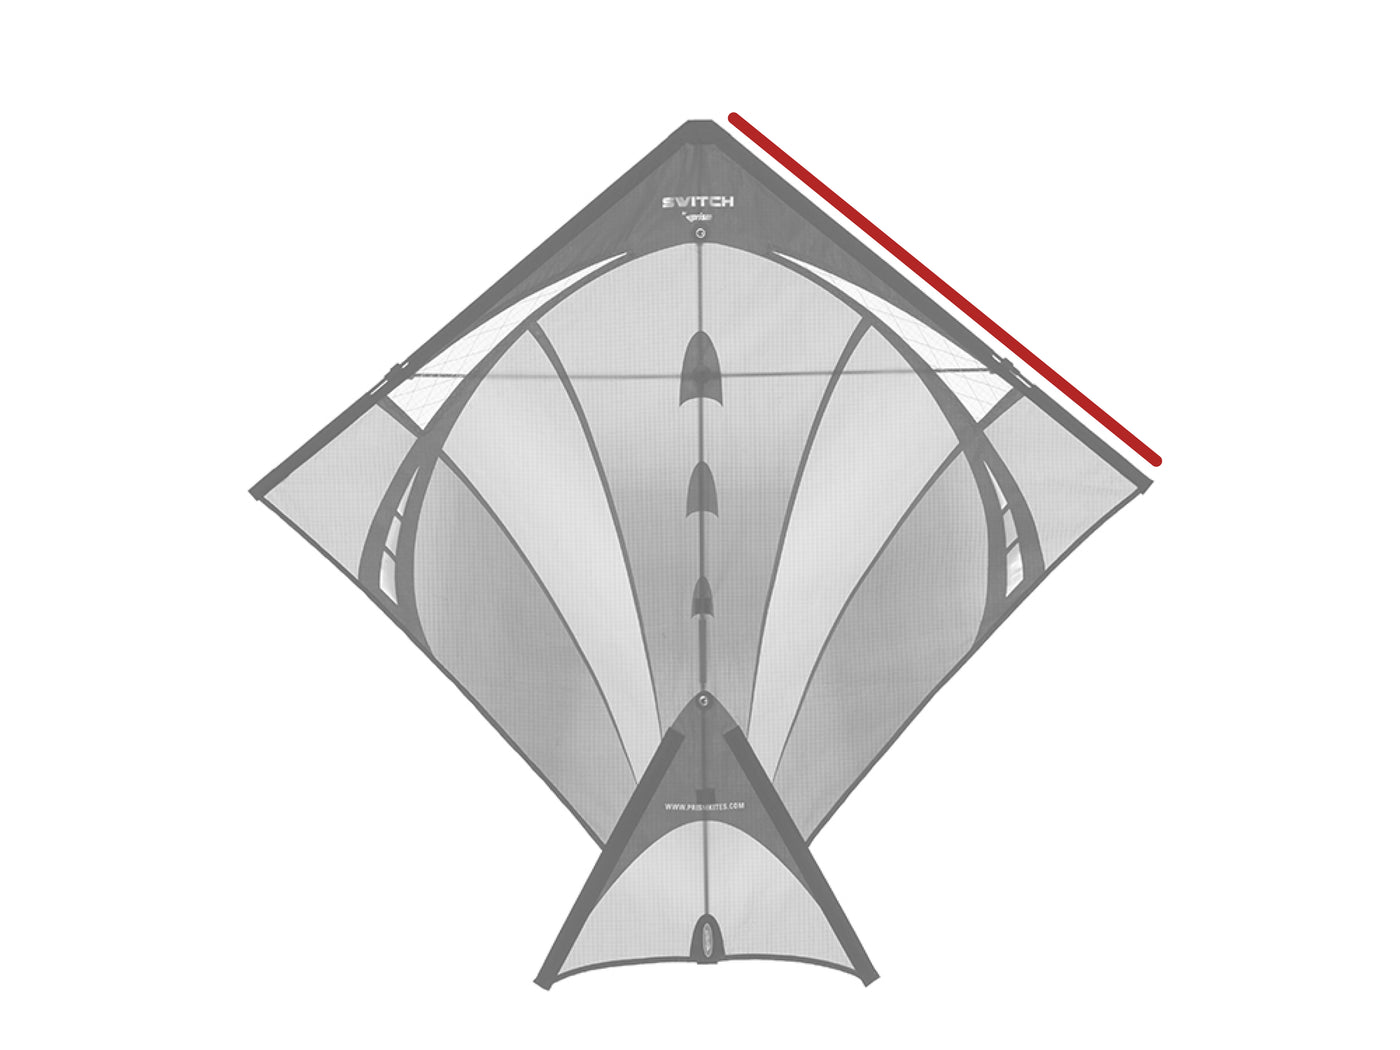 Diagram showing location of the Switch Leading Edge on the kite.